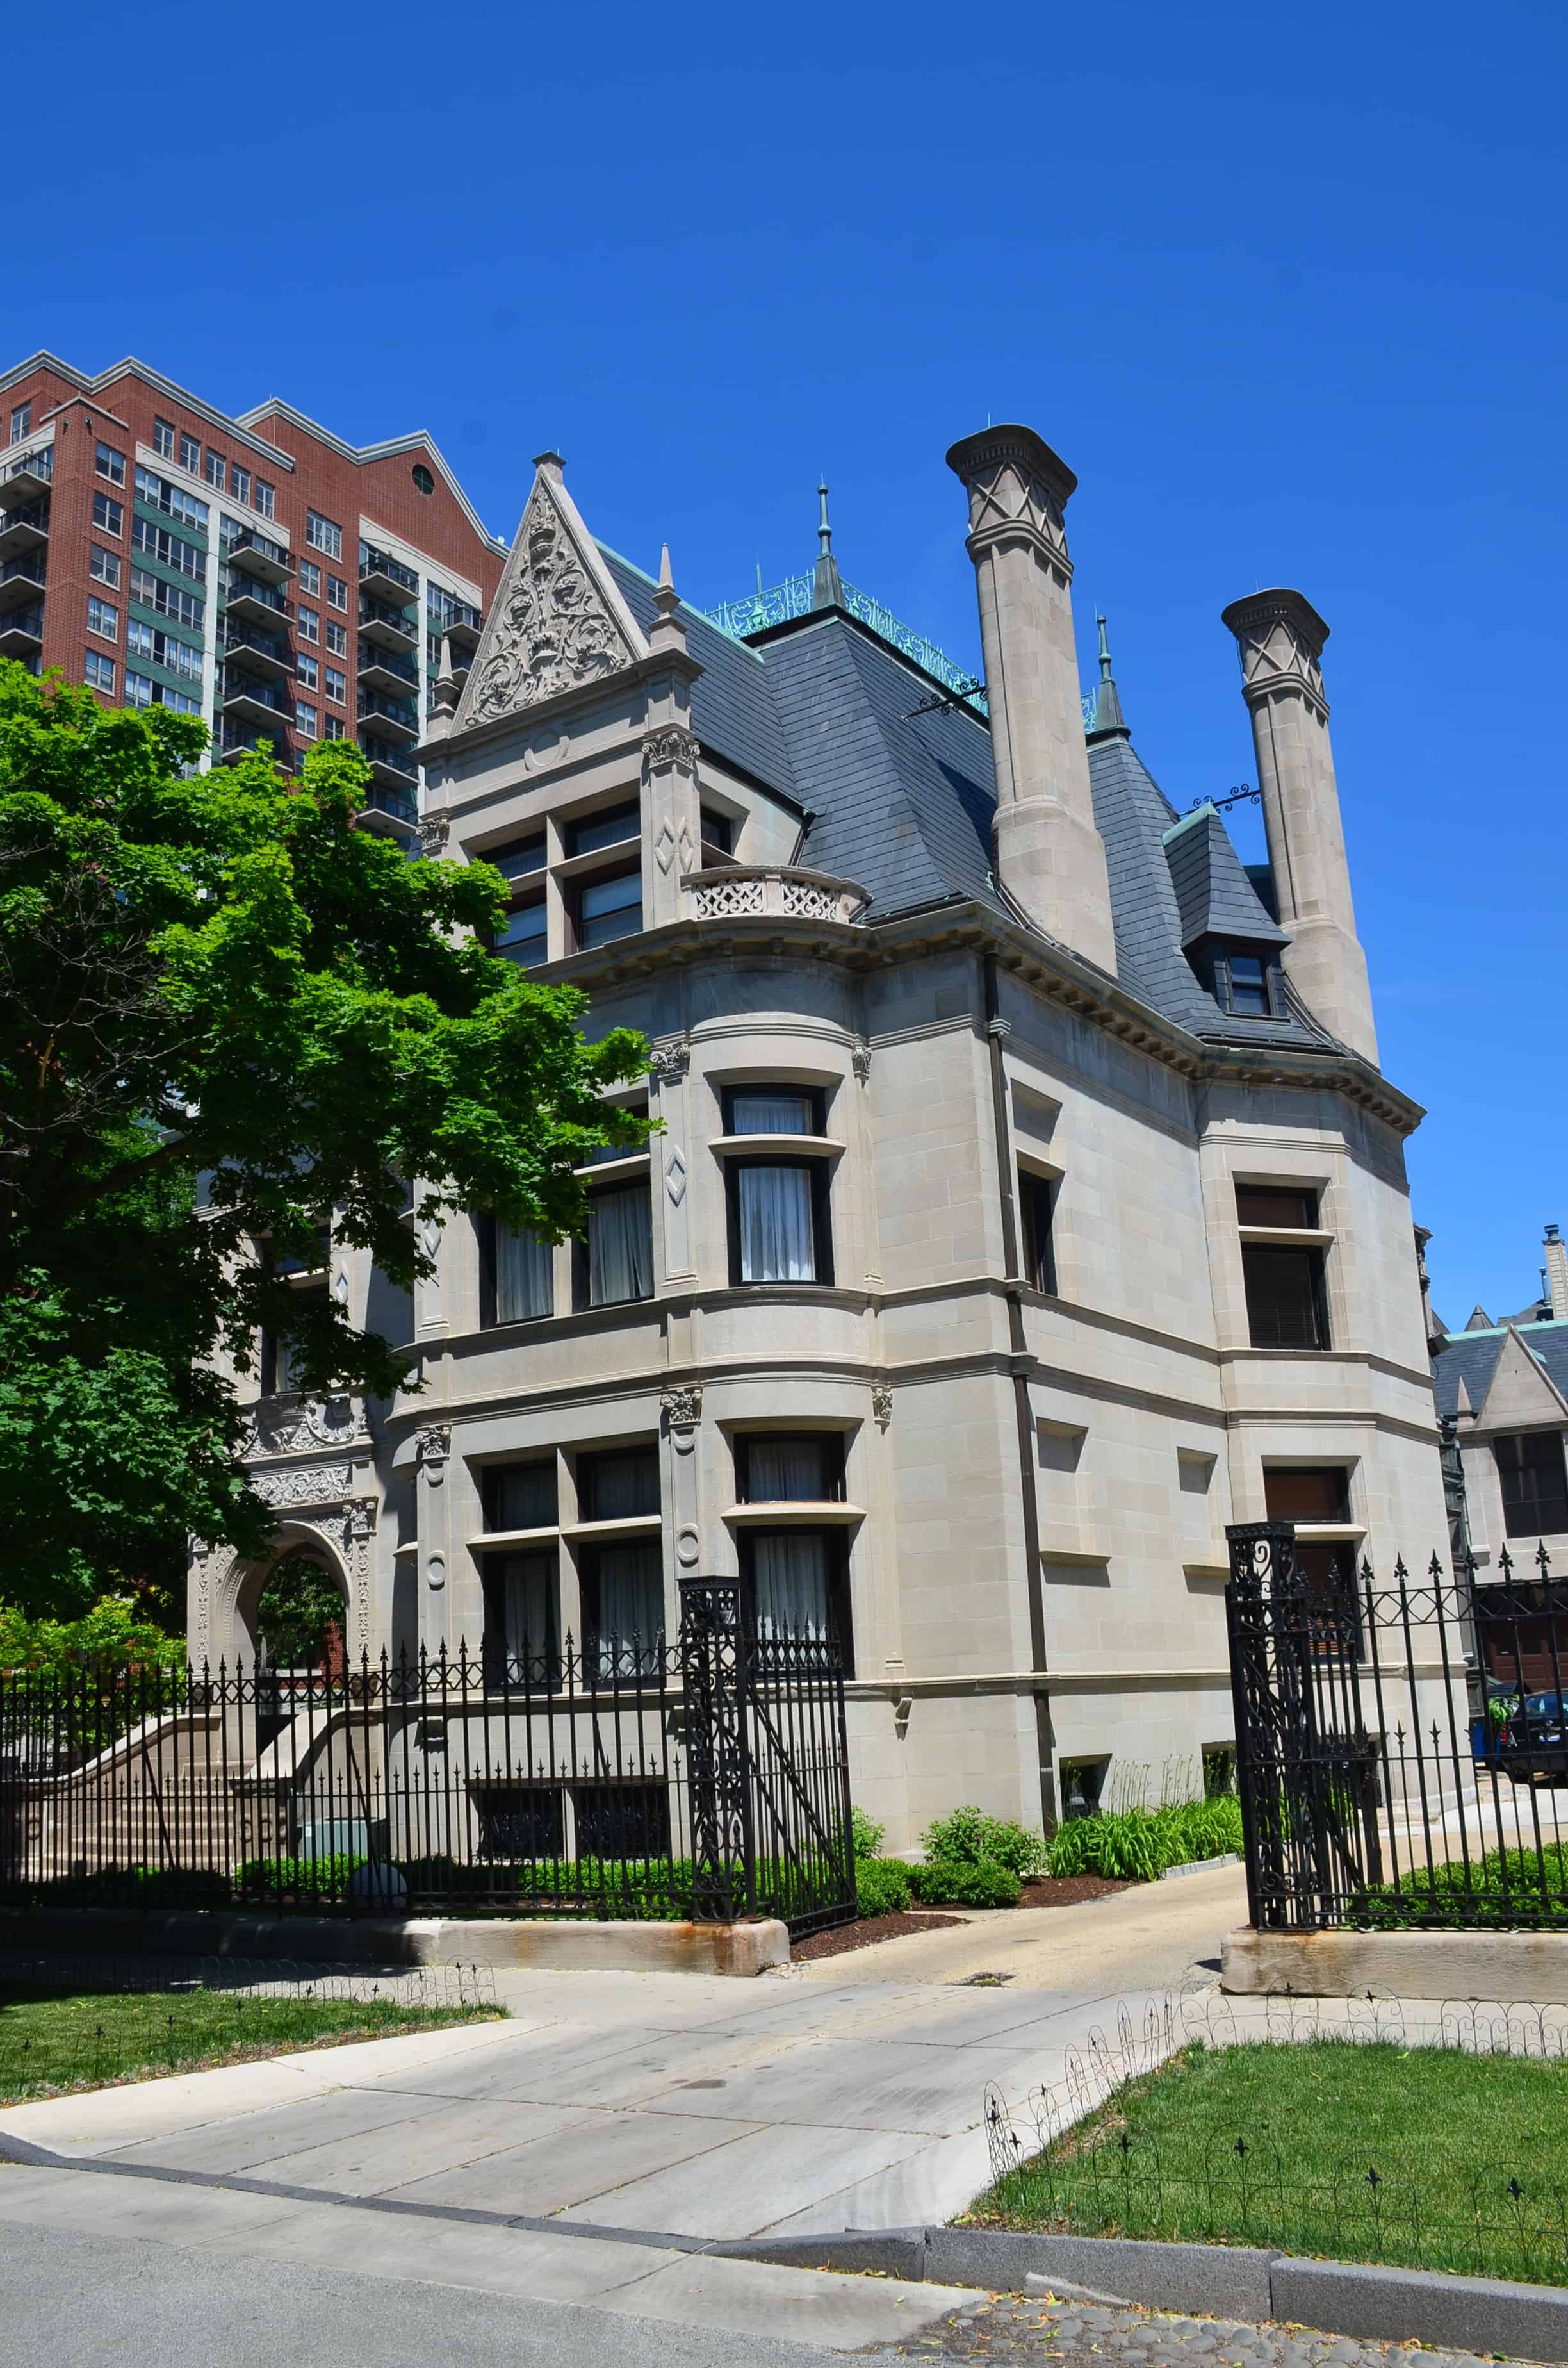 William W. Kimball House in the Prairie District in Chicago, Illinois